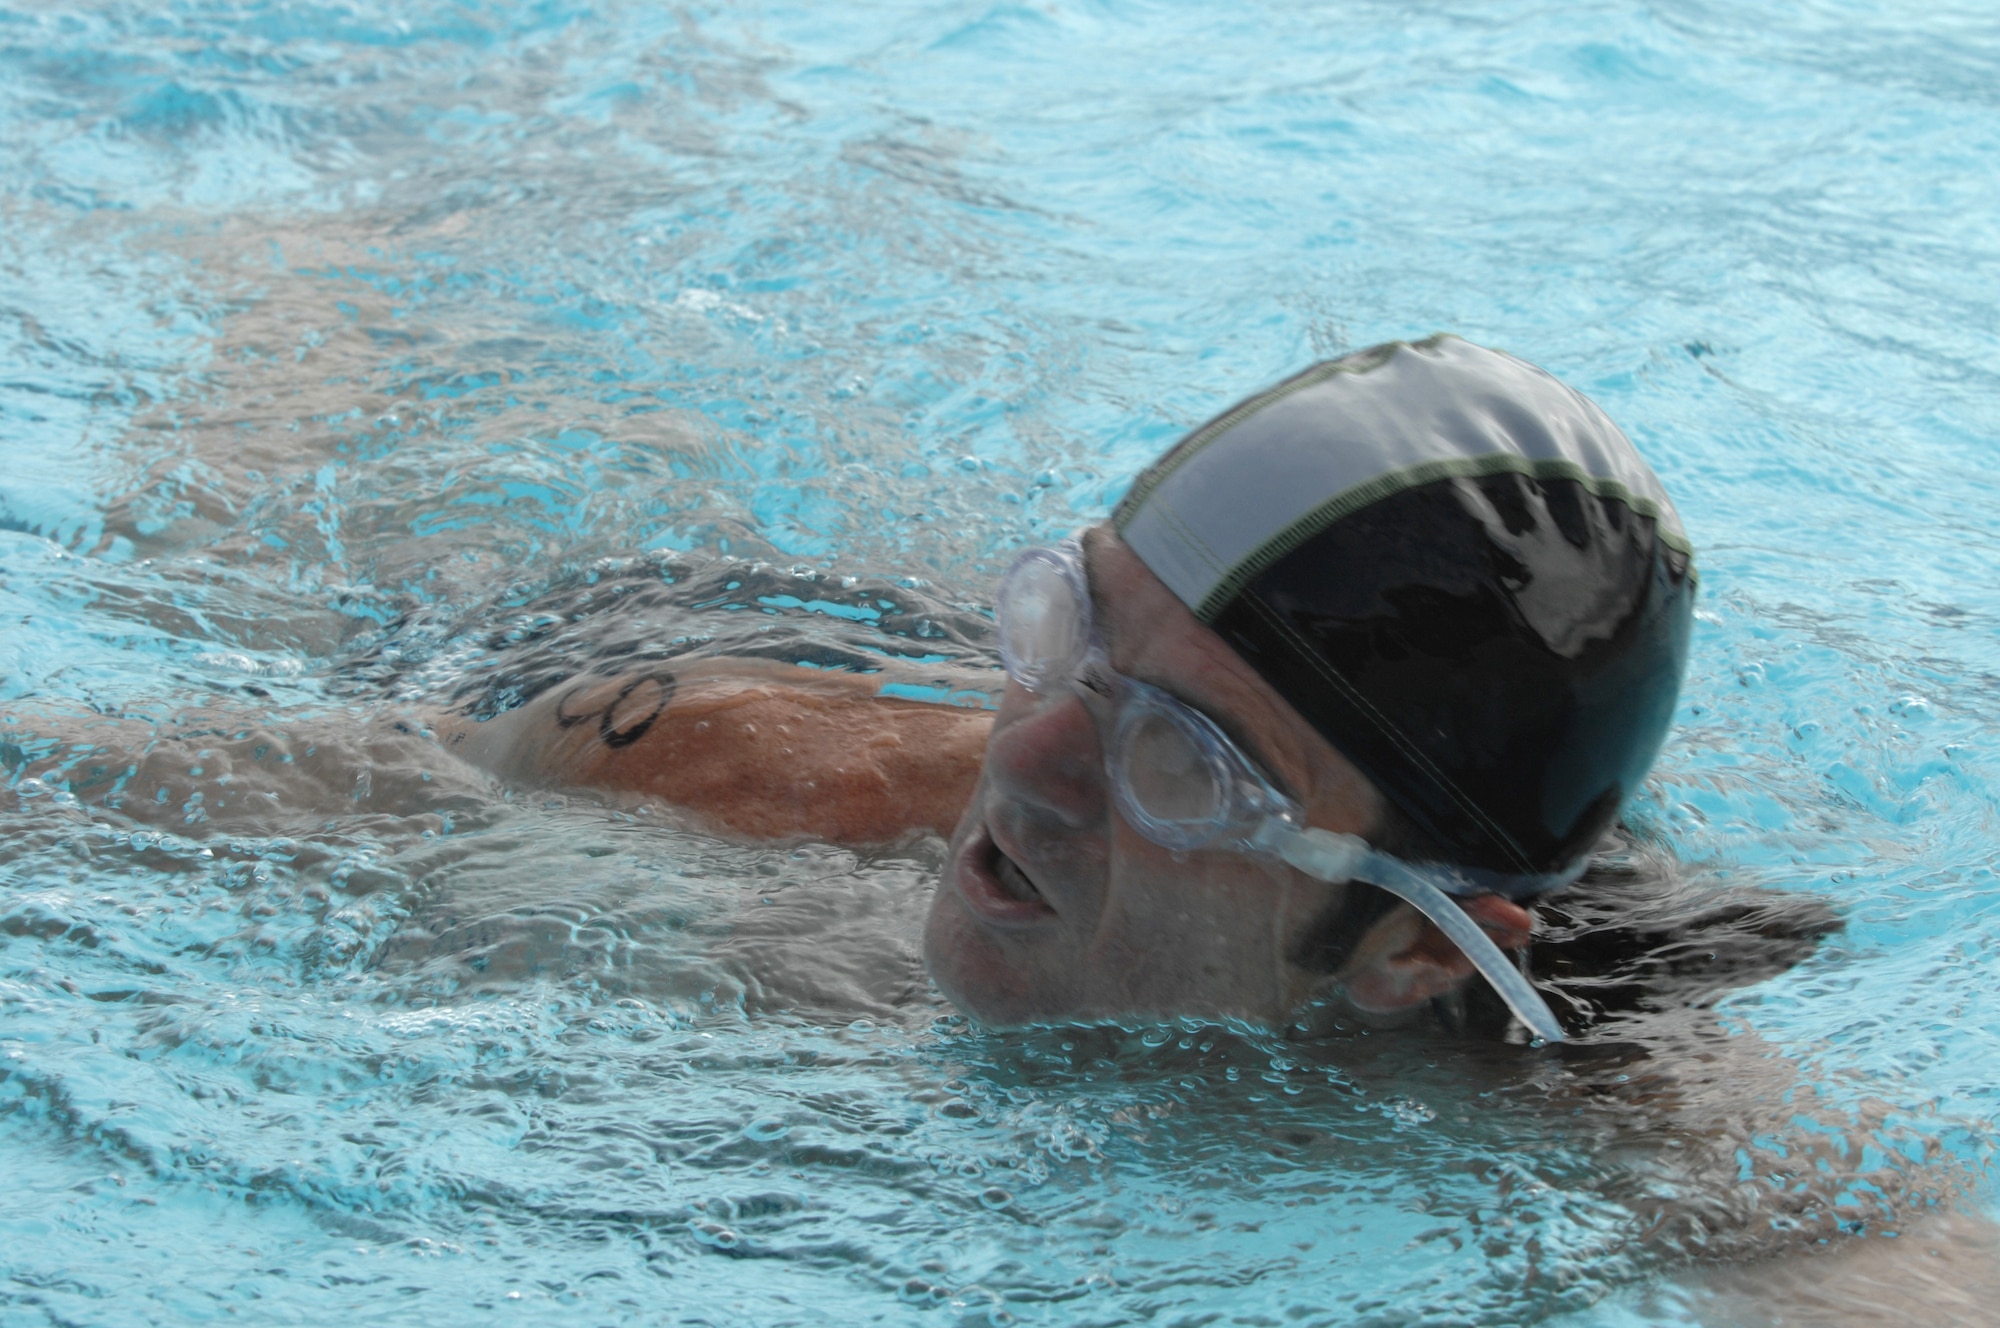 Boris Valdevit, an athlete in the Triathlon, swims 700 meters after running 5K and bicycling 30K in the annual Triathlon at Holloman Air Force Base, N.M., October 21. Mr. Valdevit came in third place, missing second place by a minute, with a time of one hour and 38 minutes. (U.S. Air Force photo/Airman Sondra M. Escutia)